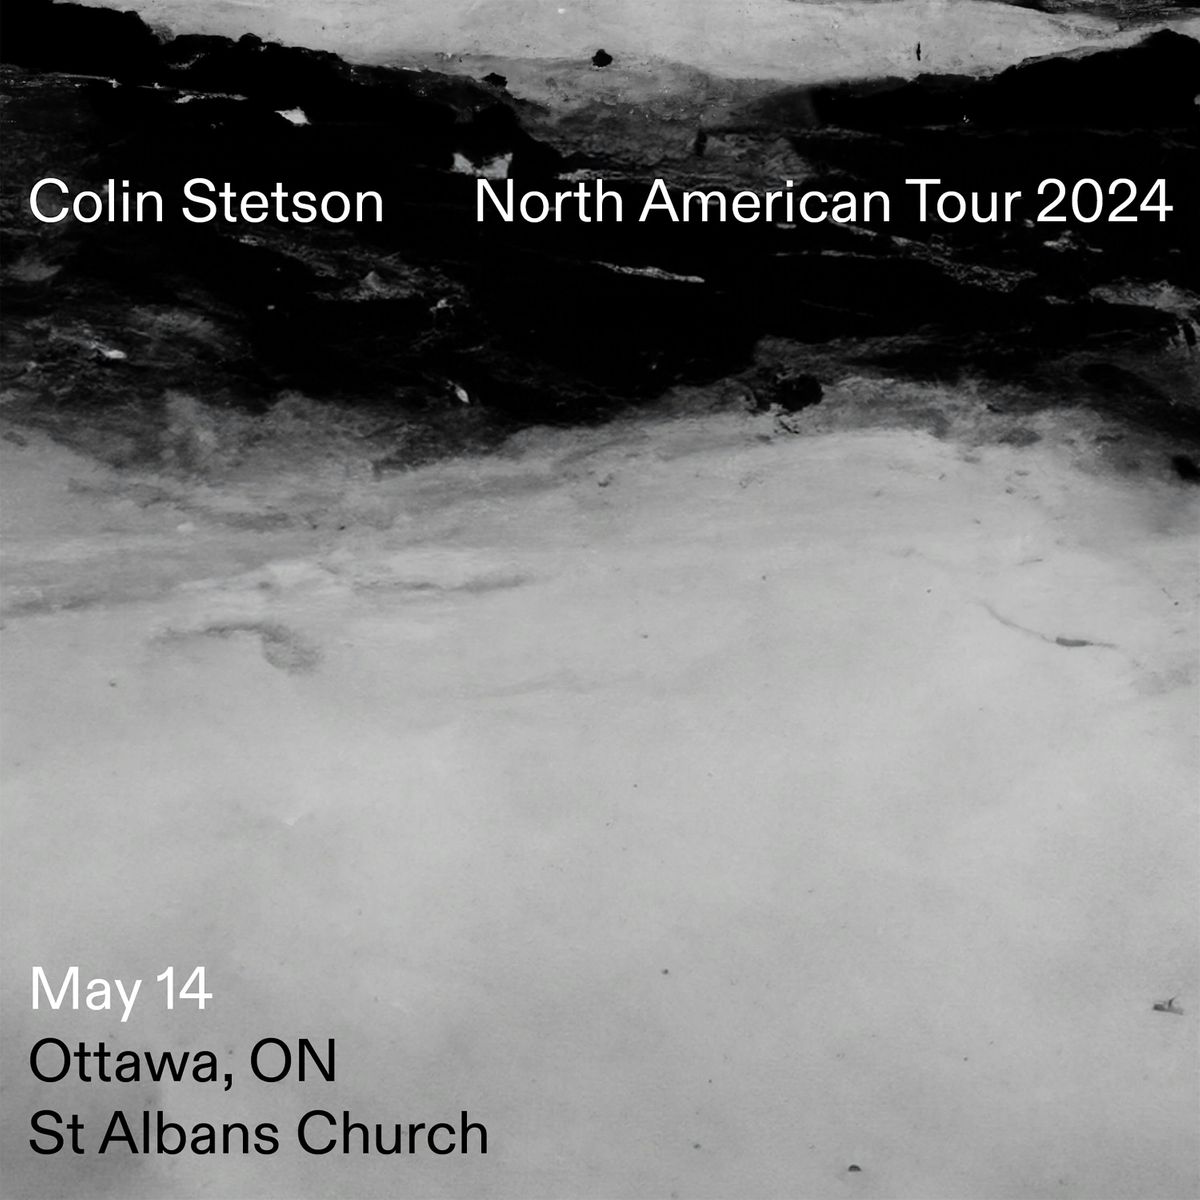 *SOLD OUT \/ 2ND SHOW ADDED* Colin Stetson, FUJI||||||||||TA